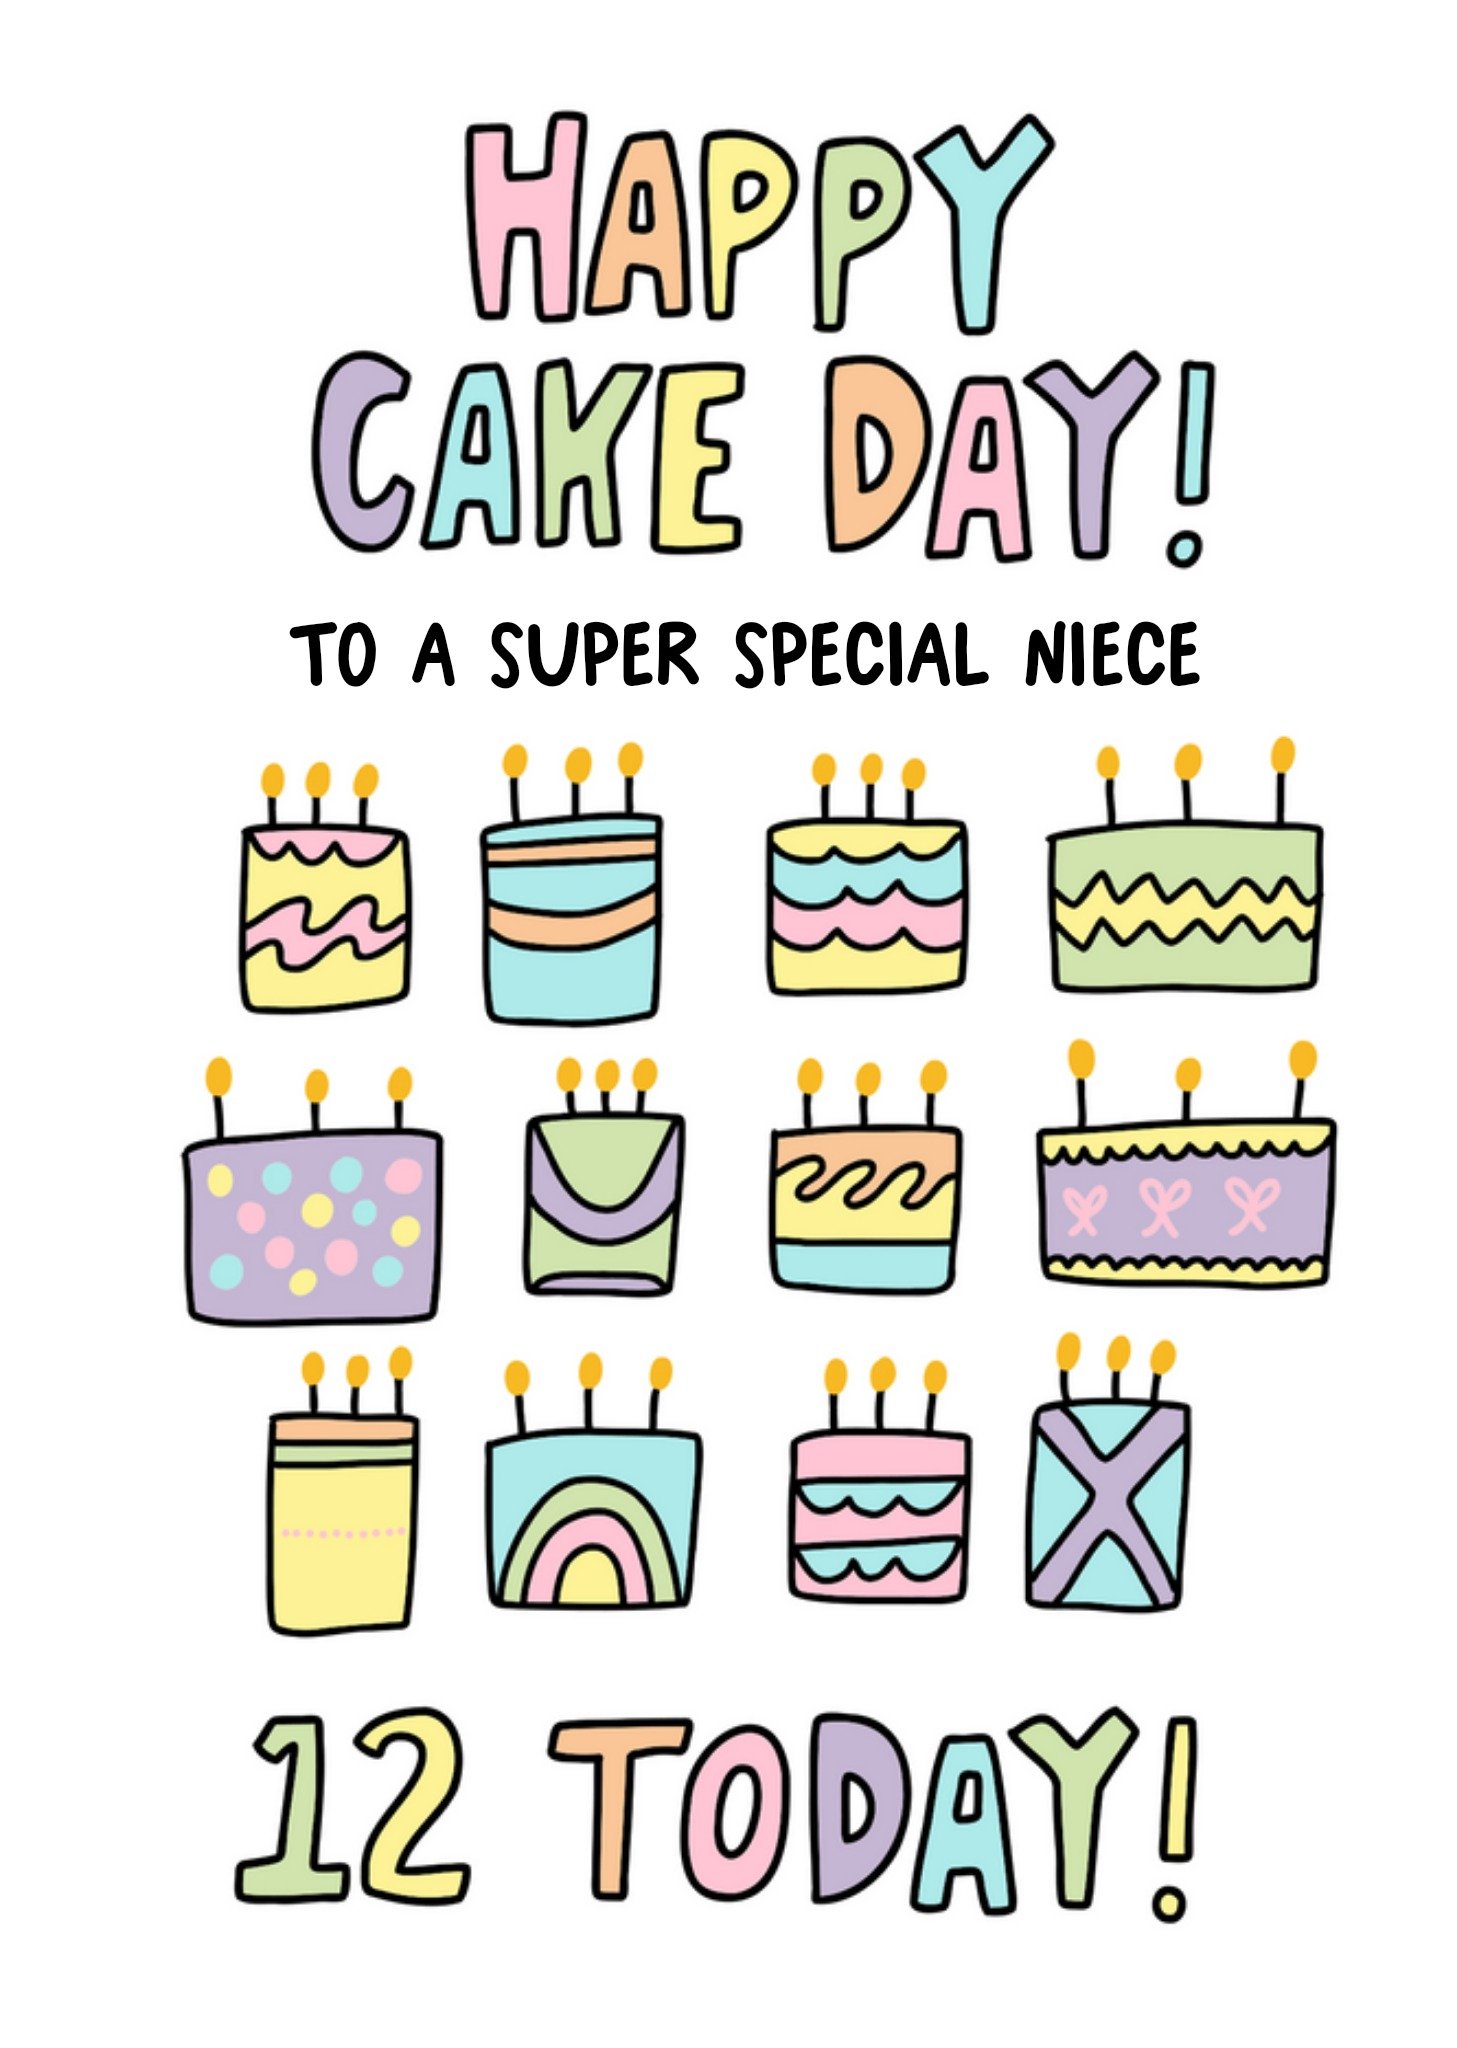 Moonpig Angela Chick Happy Cake Day 12 Today Illustrated Colourful Birthday Cakes Card, Large